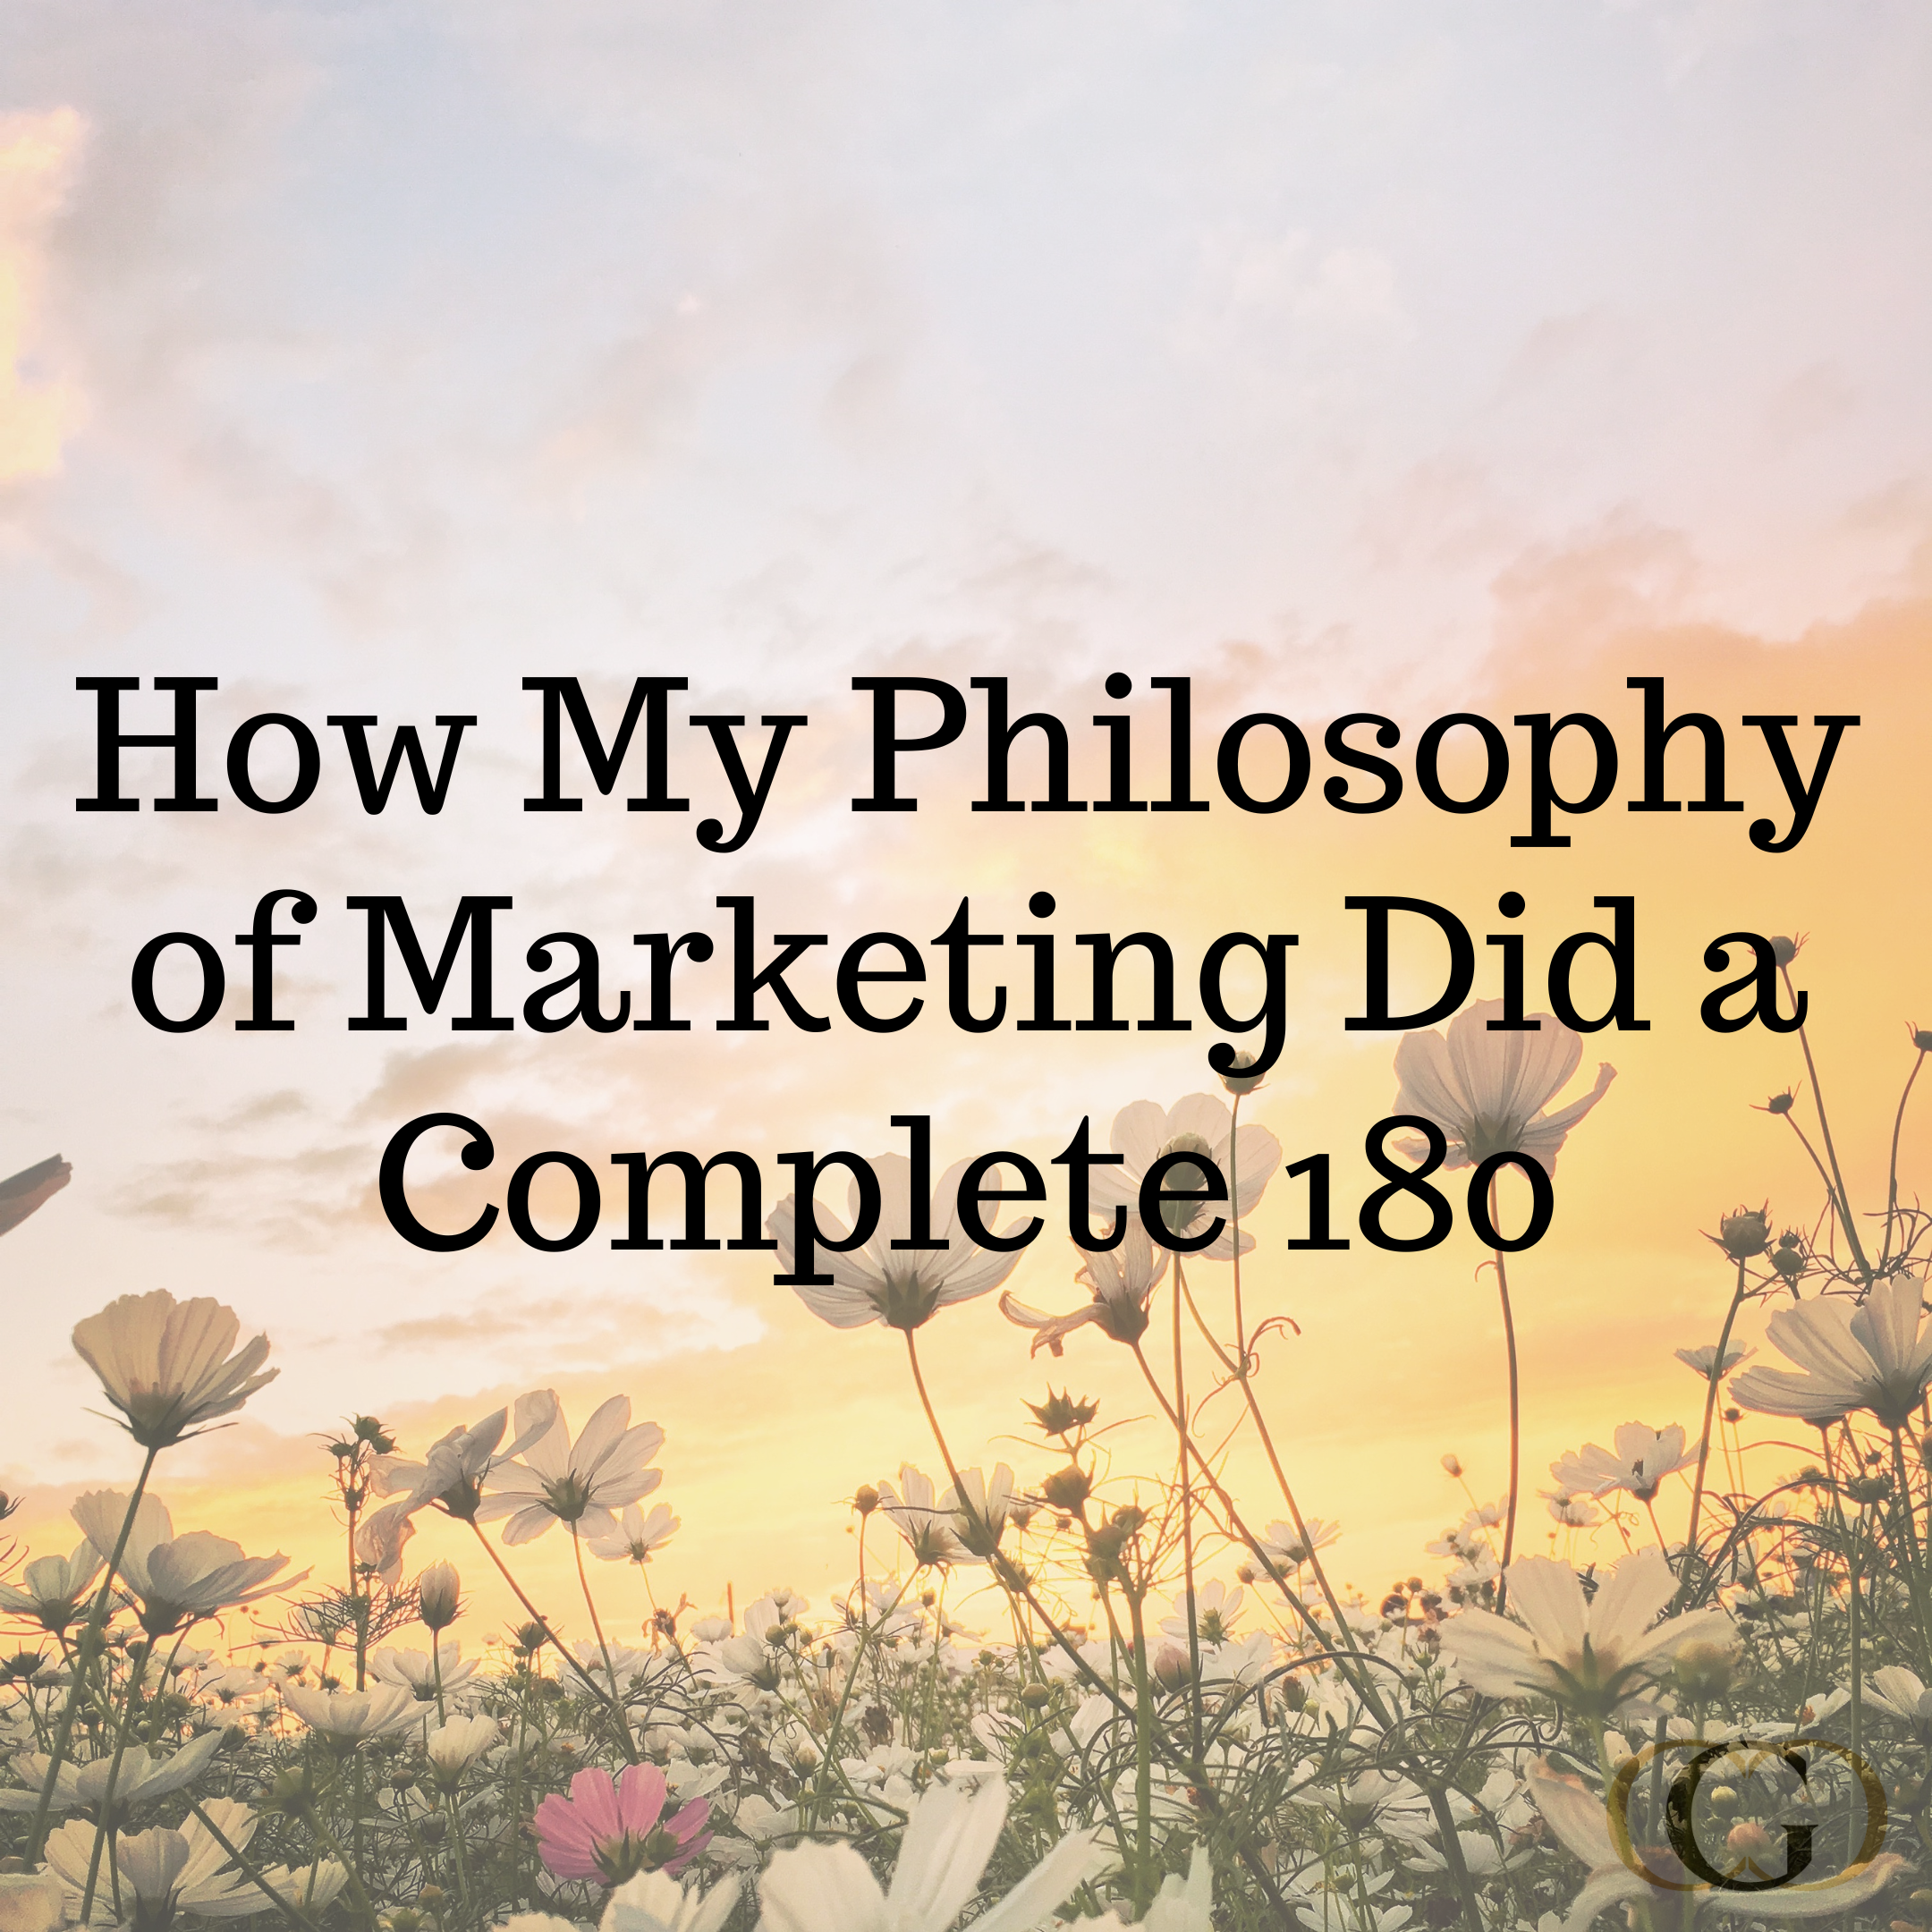 How My Philosophy of Marketing Did a Complete 180